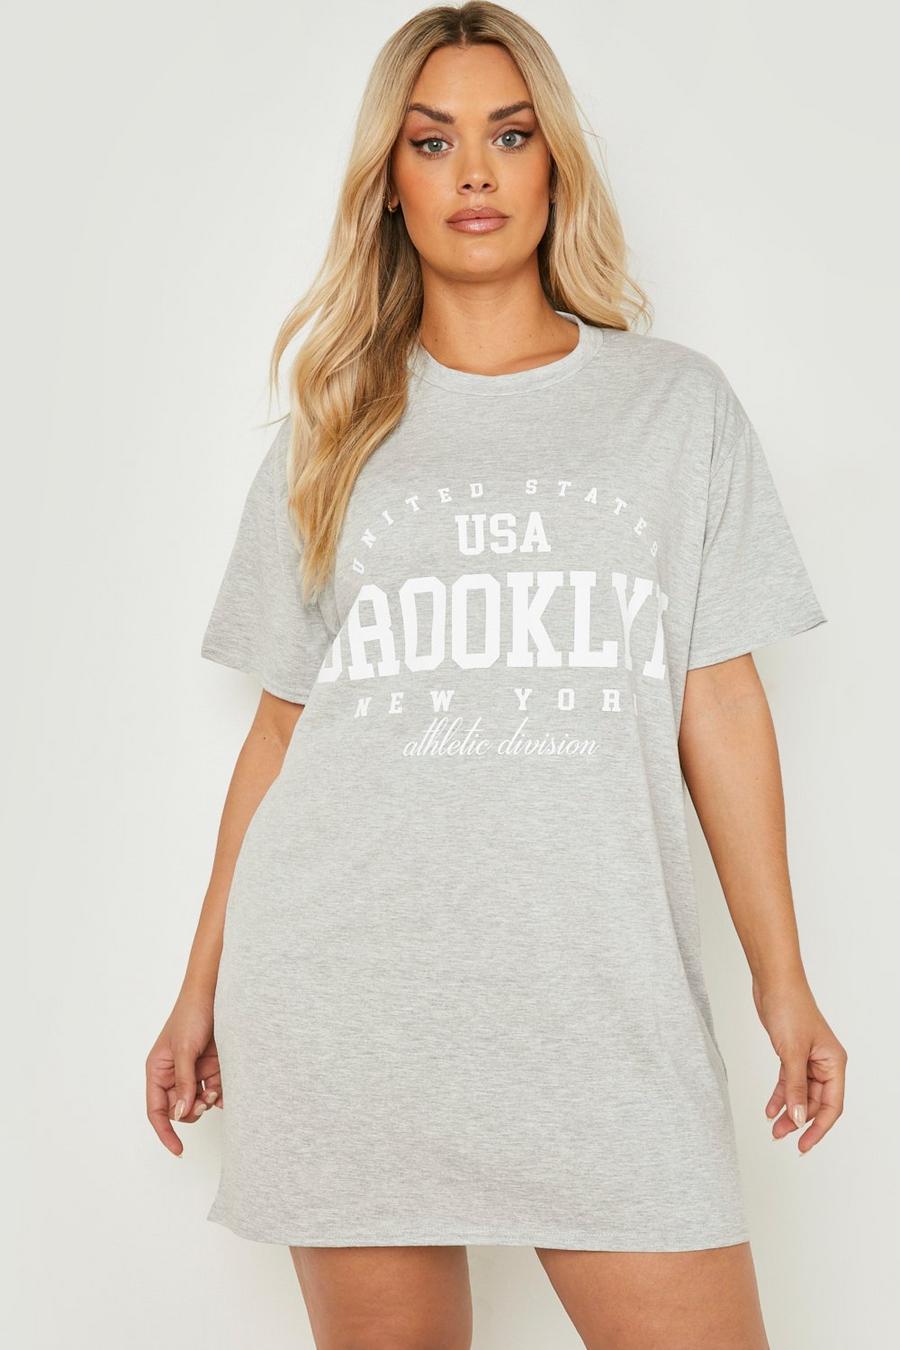 Grande taille - Robe t-shirt oversize à slogan Brooklyn, Grey marl image number 1